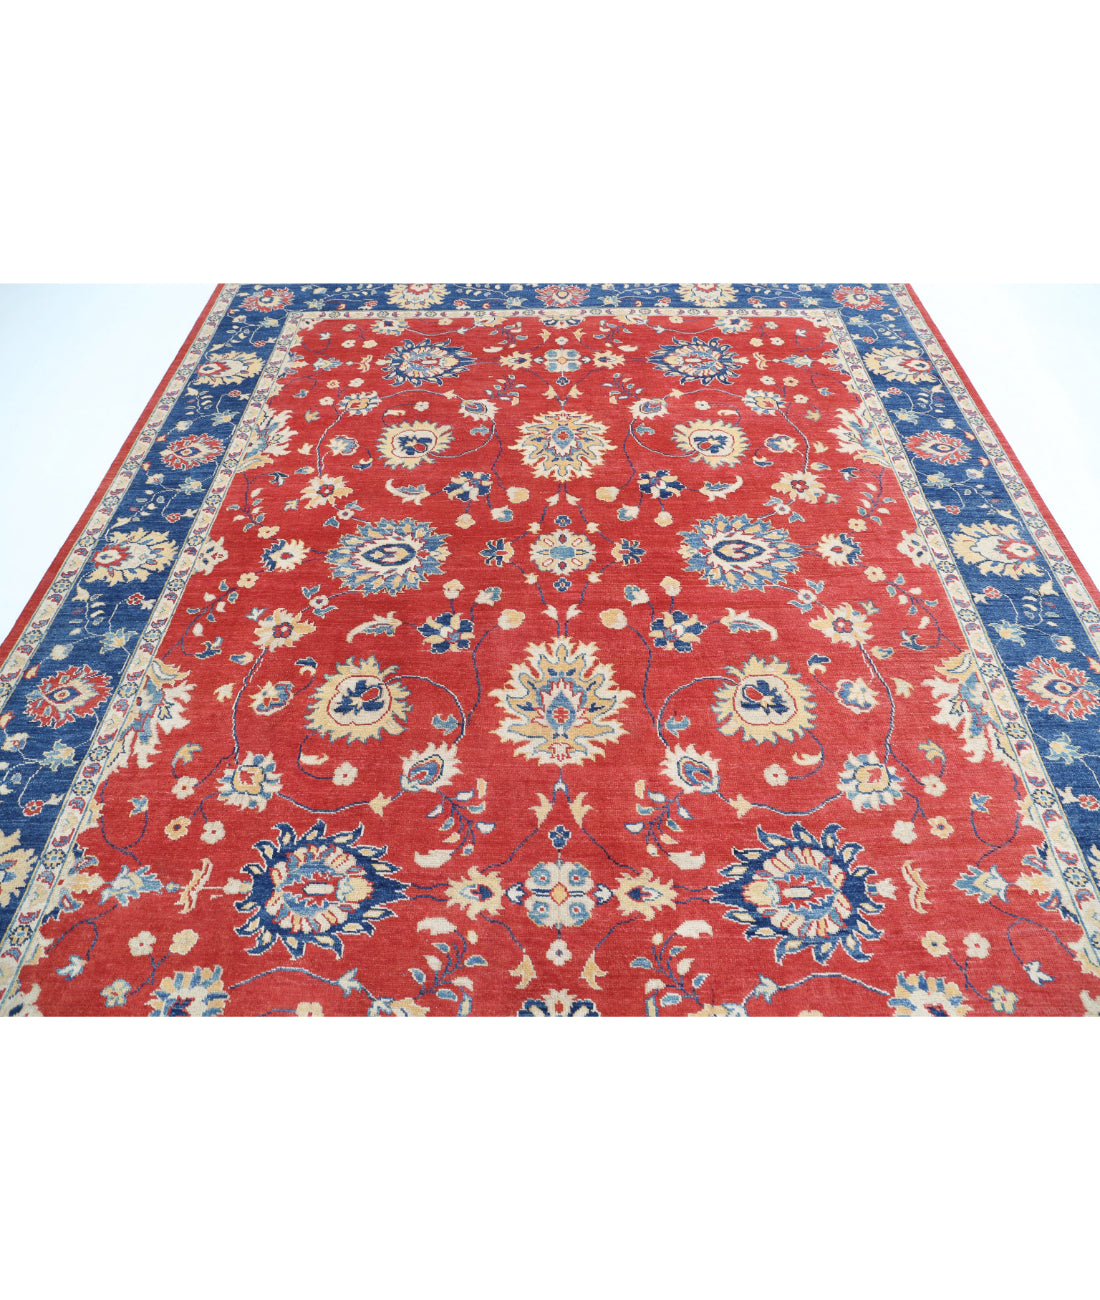 Ziegler 8'4'' X 9'4'' Hand-Knotted Wool Rug 8'4'' x 9'4'' (250 X 280) / Red / Blue